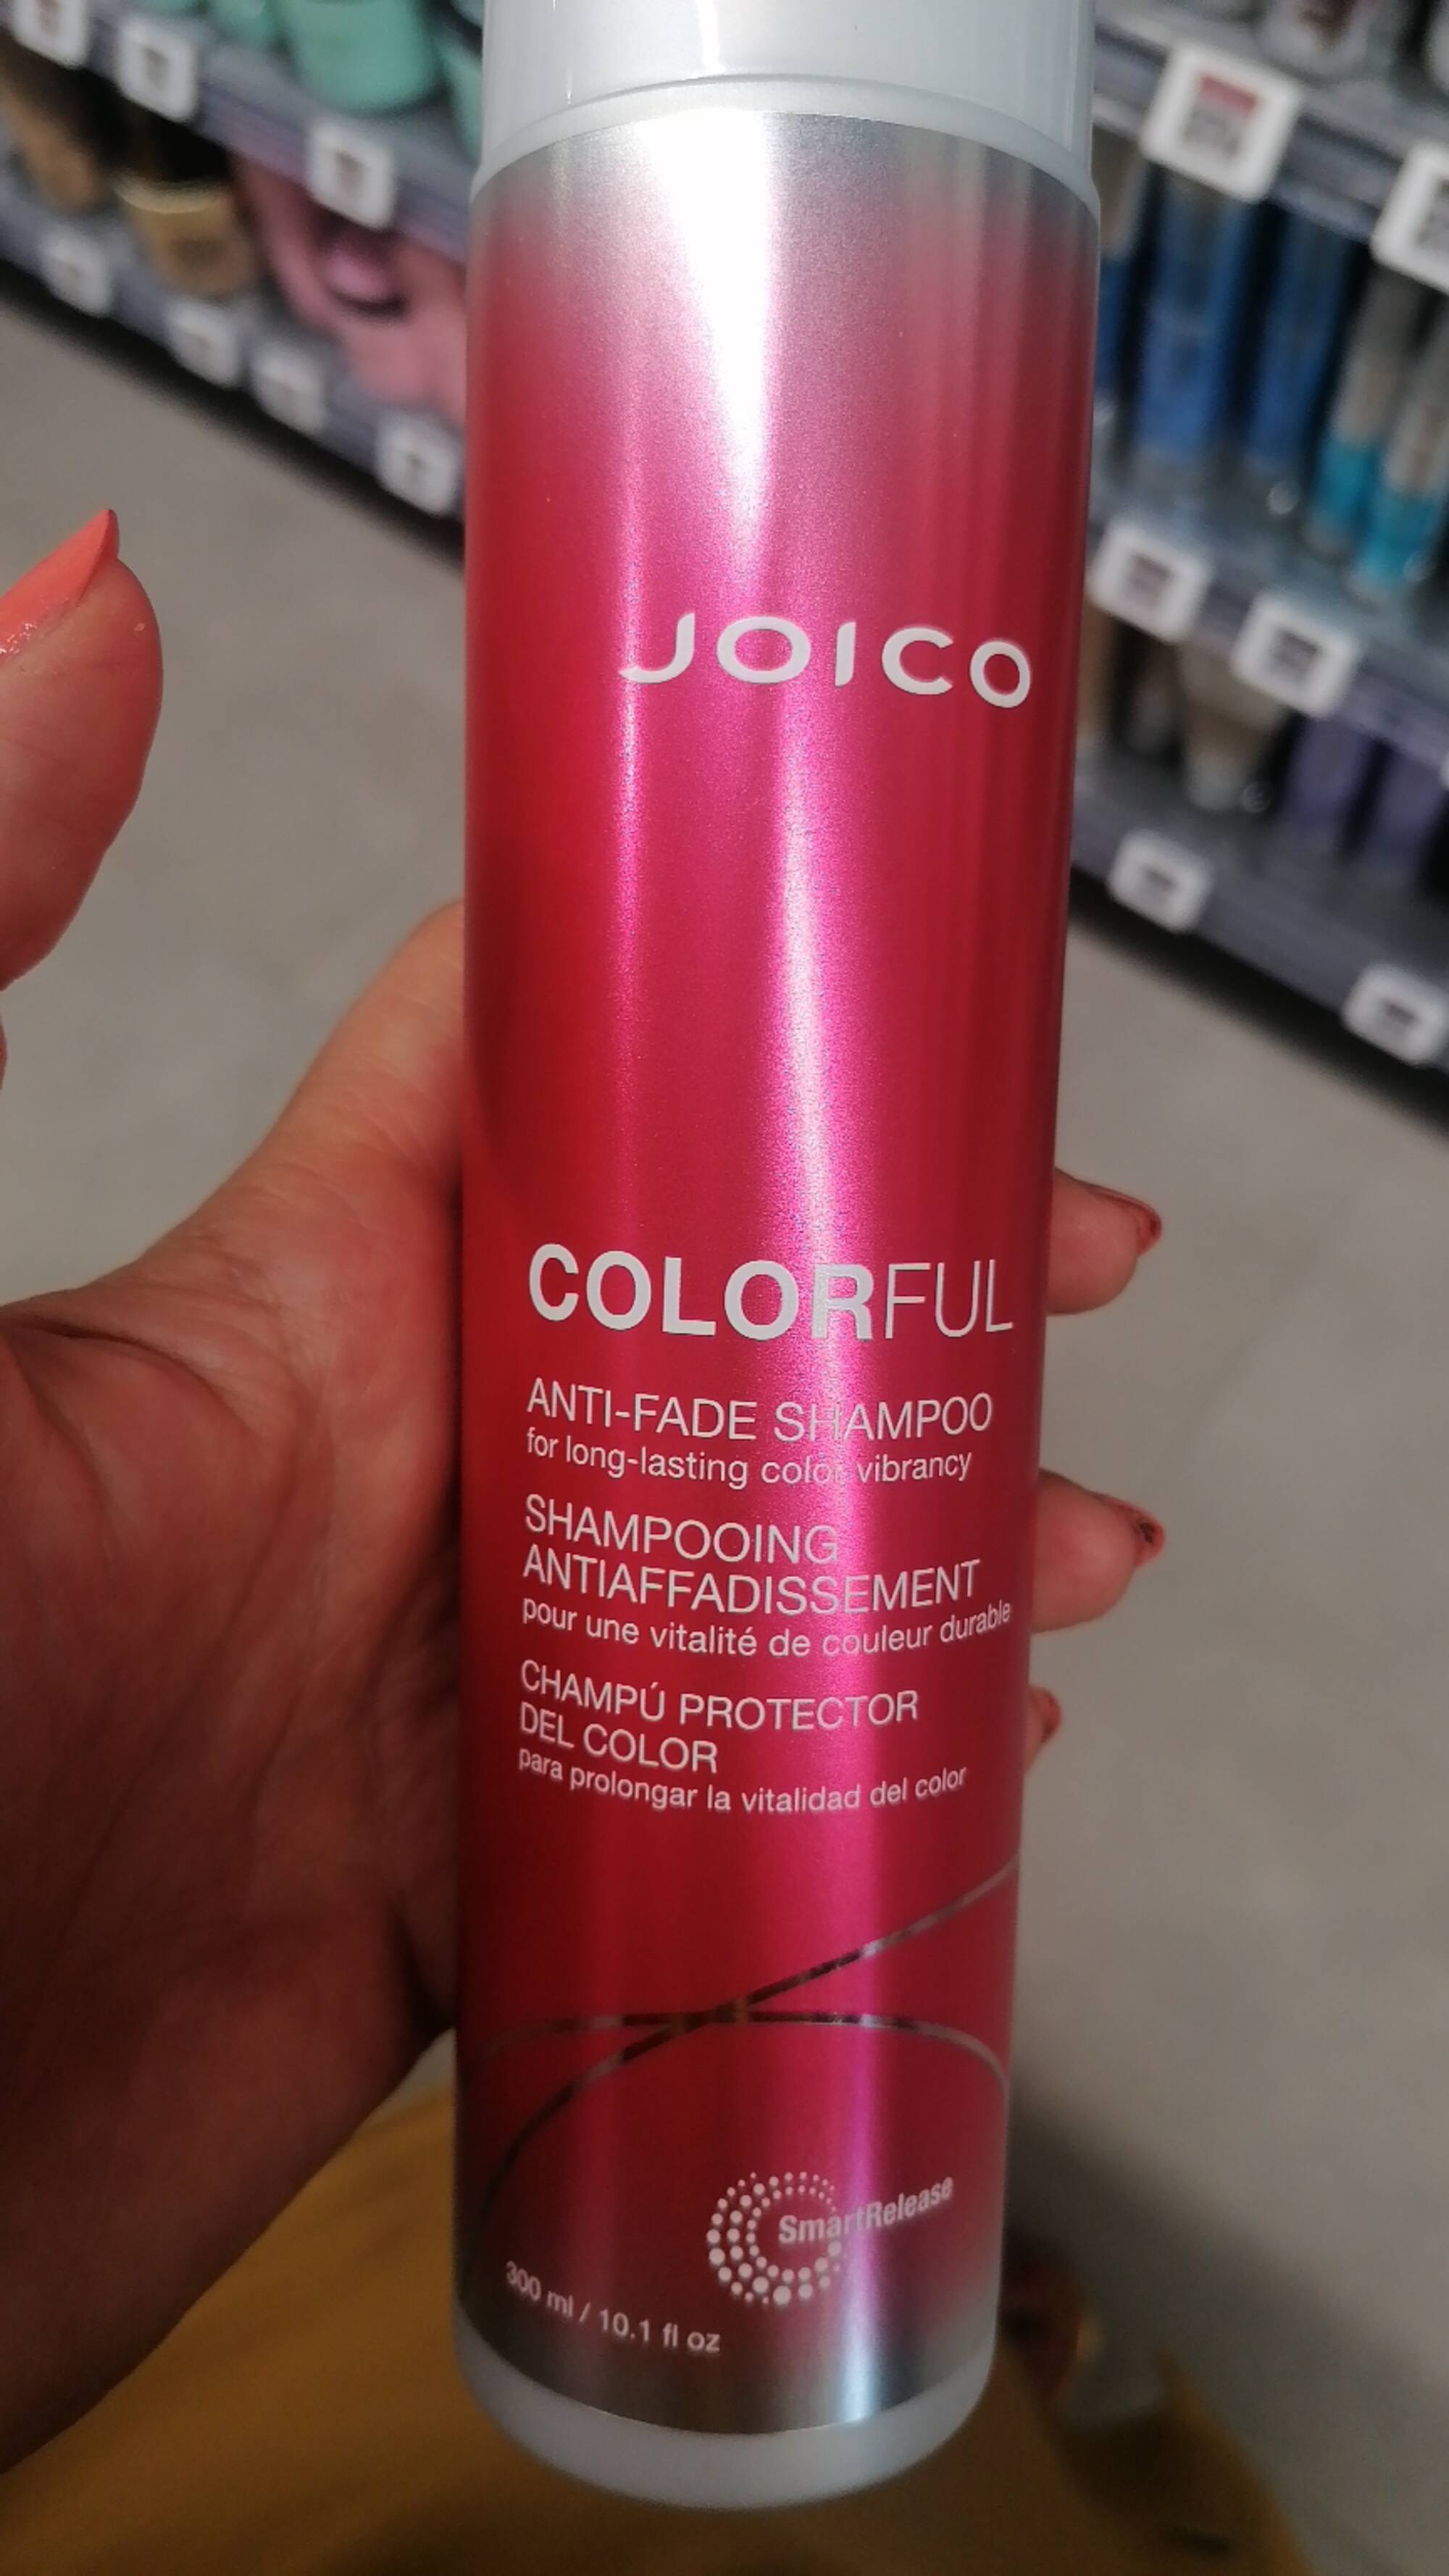 JOICO - Colorful - Shampooing antiaffadissement